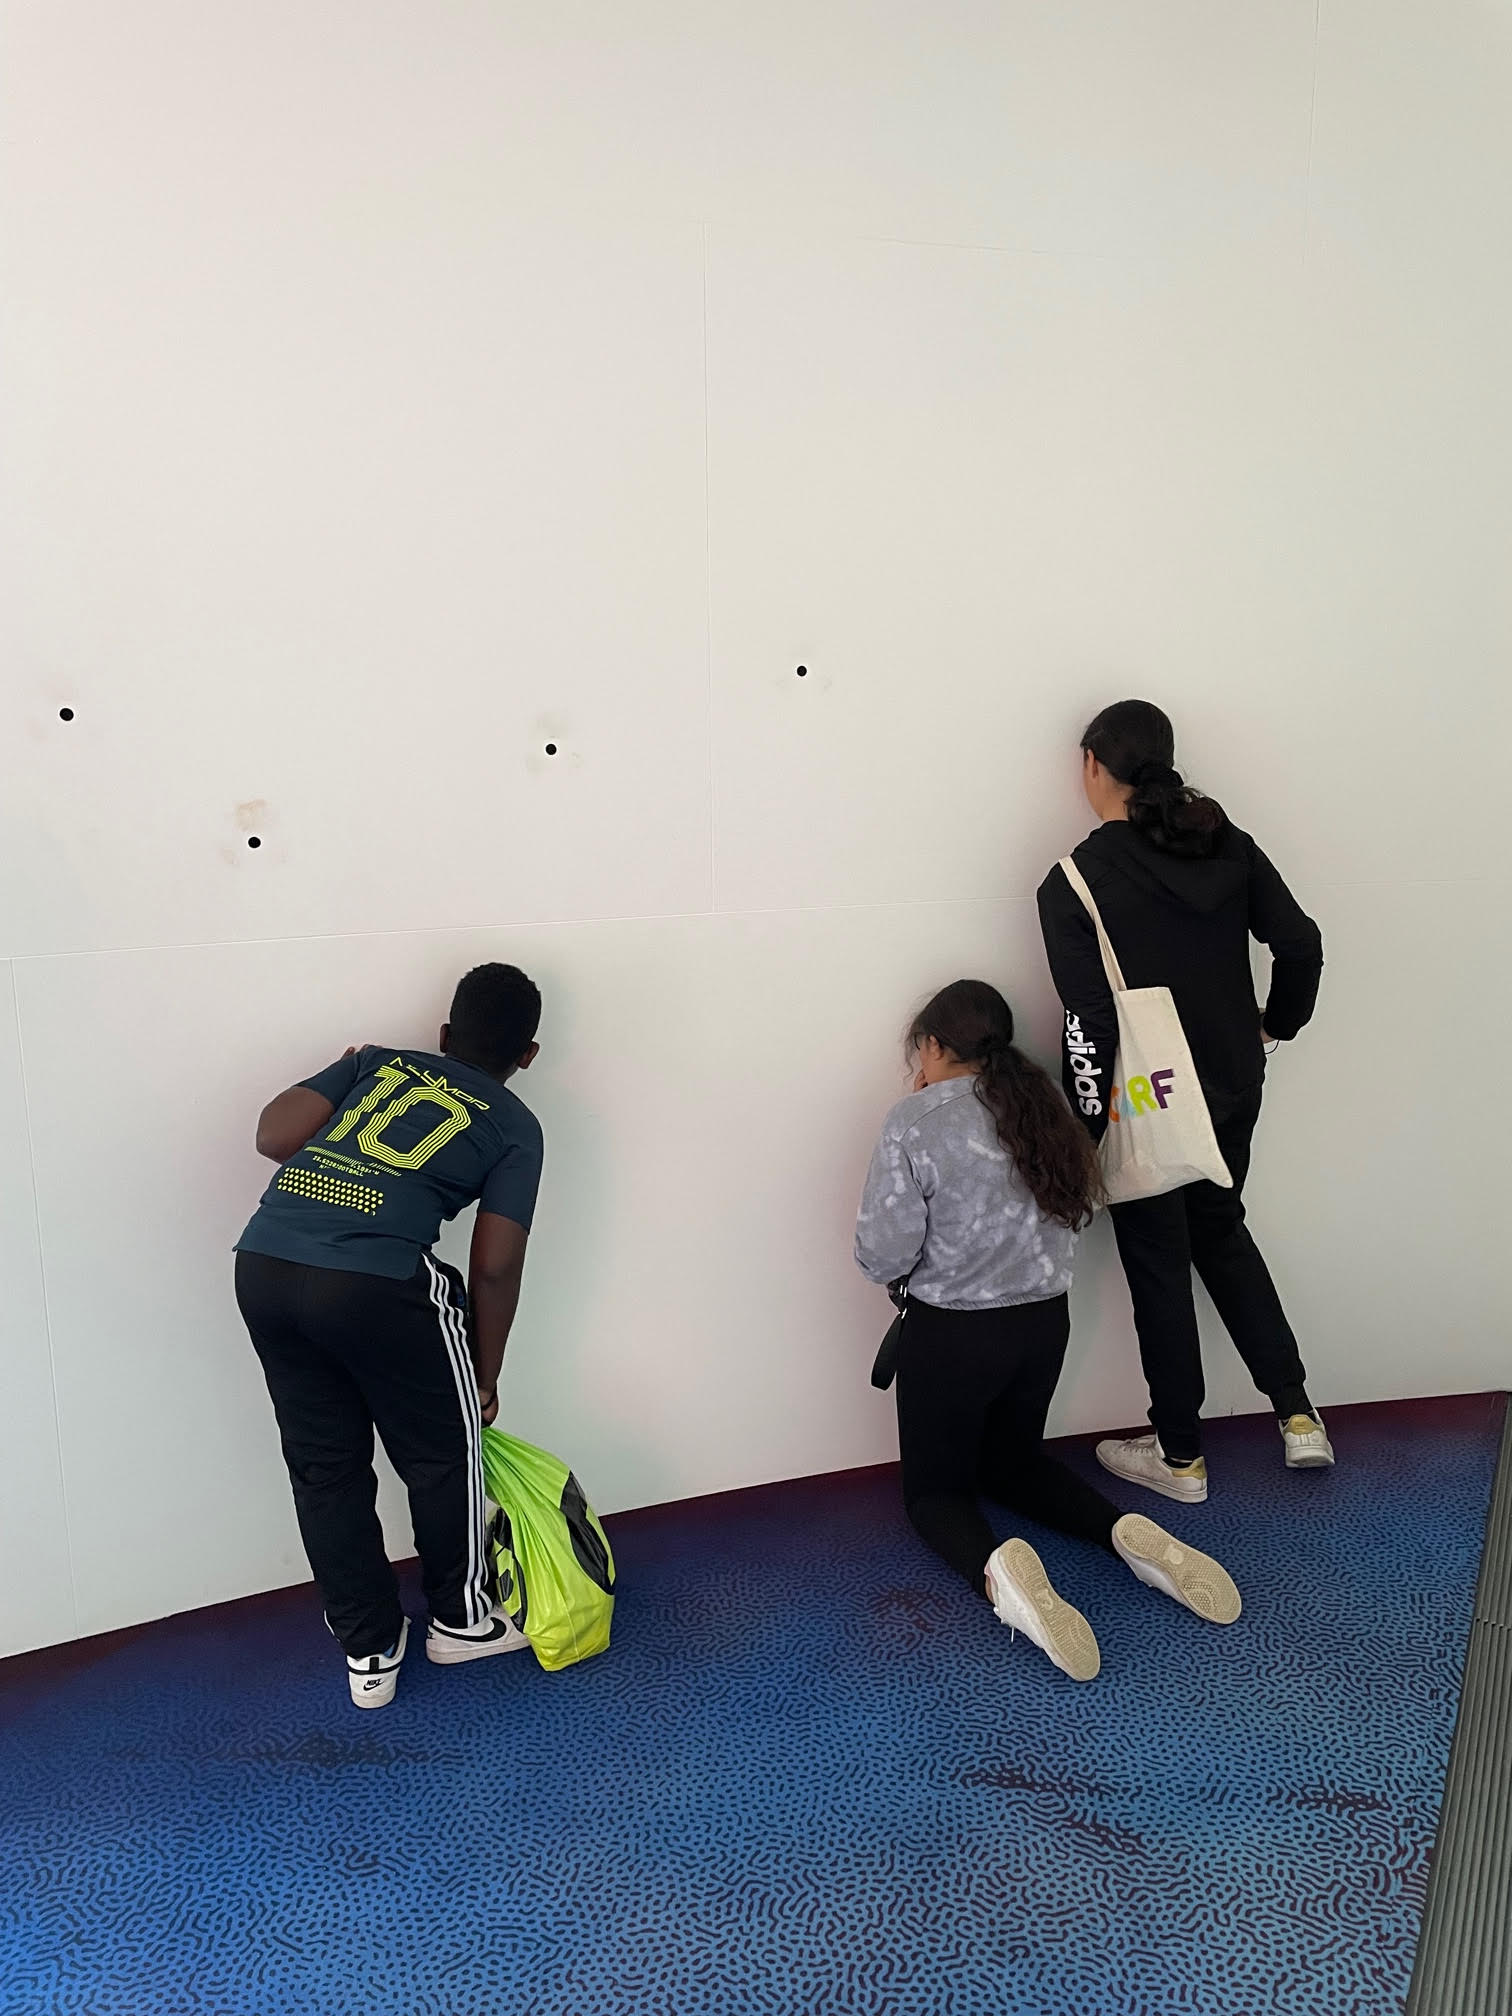 3 young people peering through small holes in a wall in an exhibition space